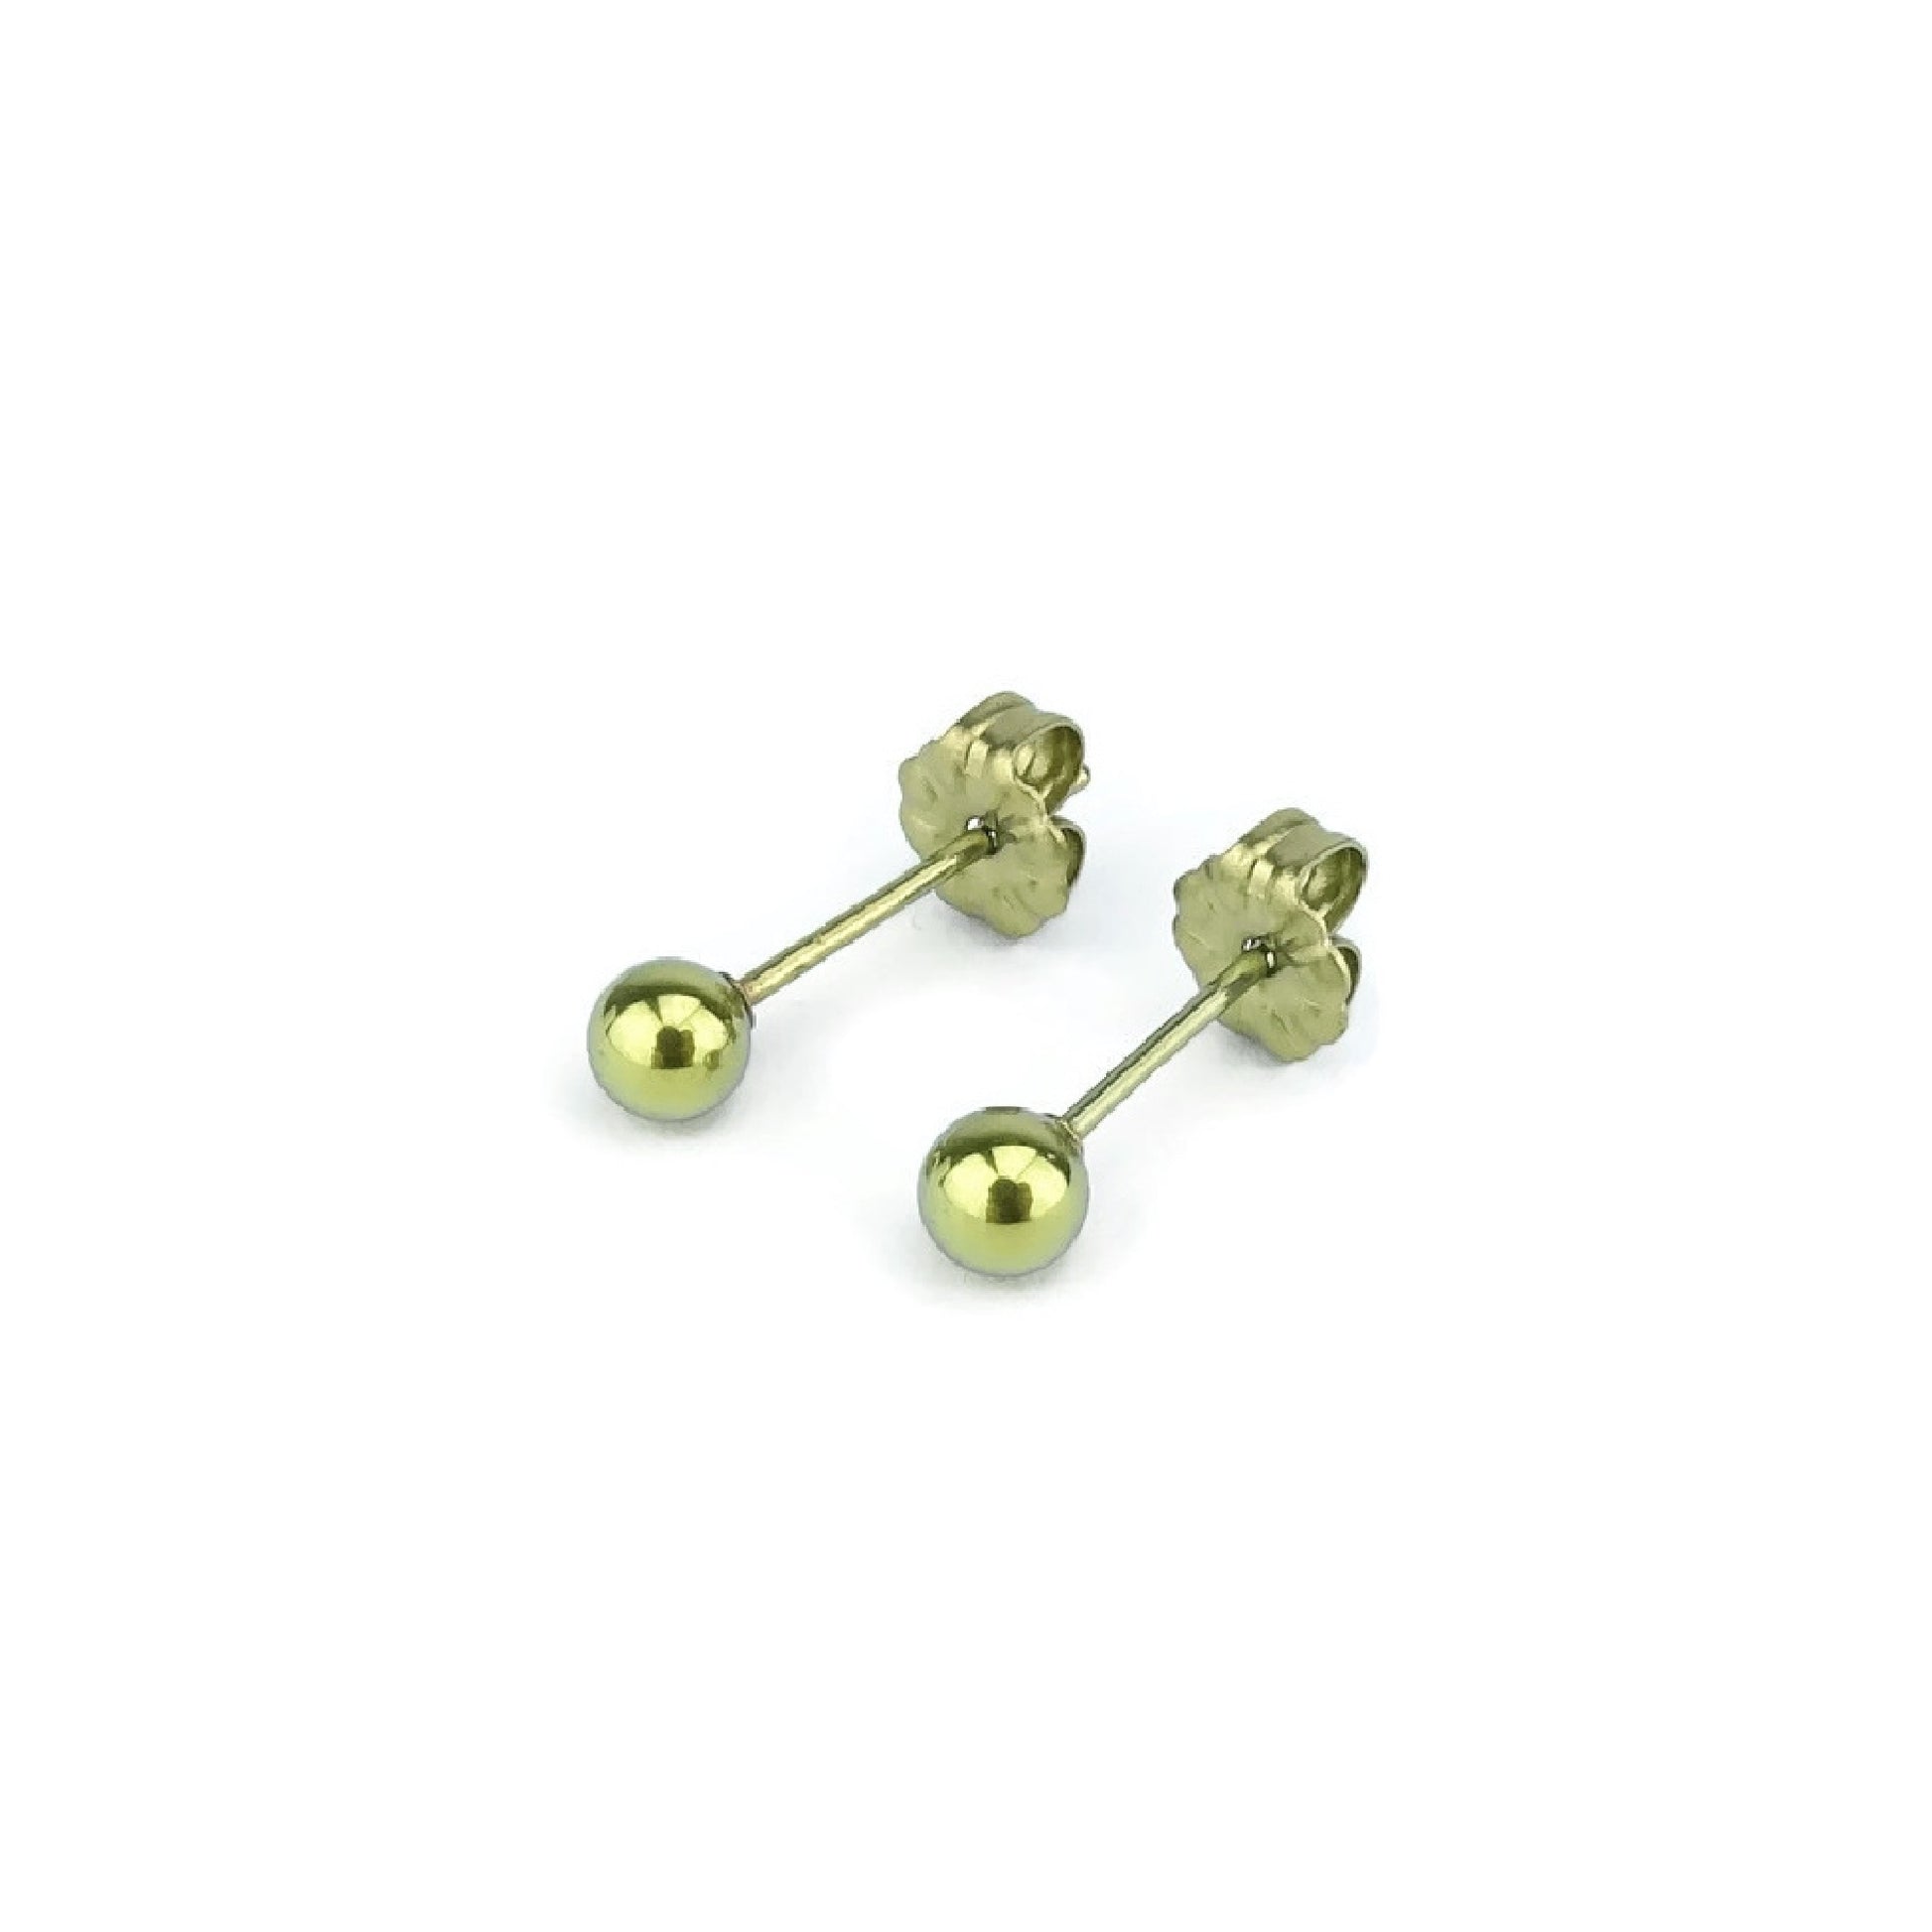 9ct Gold 4mm Ball Stud Earrings | Angus & Coote